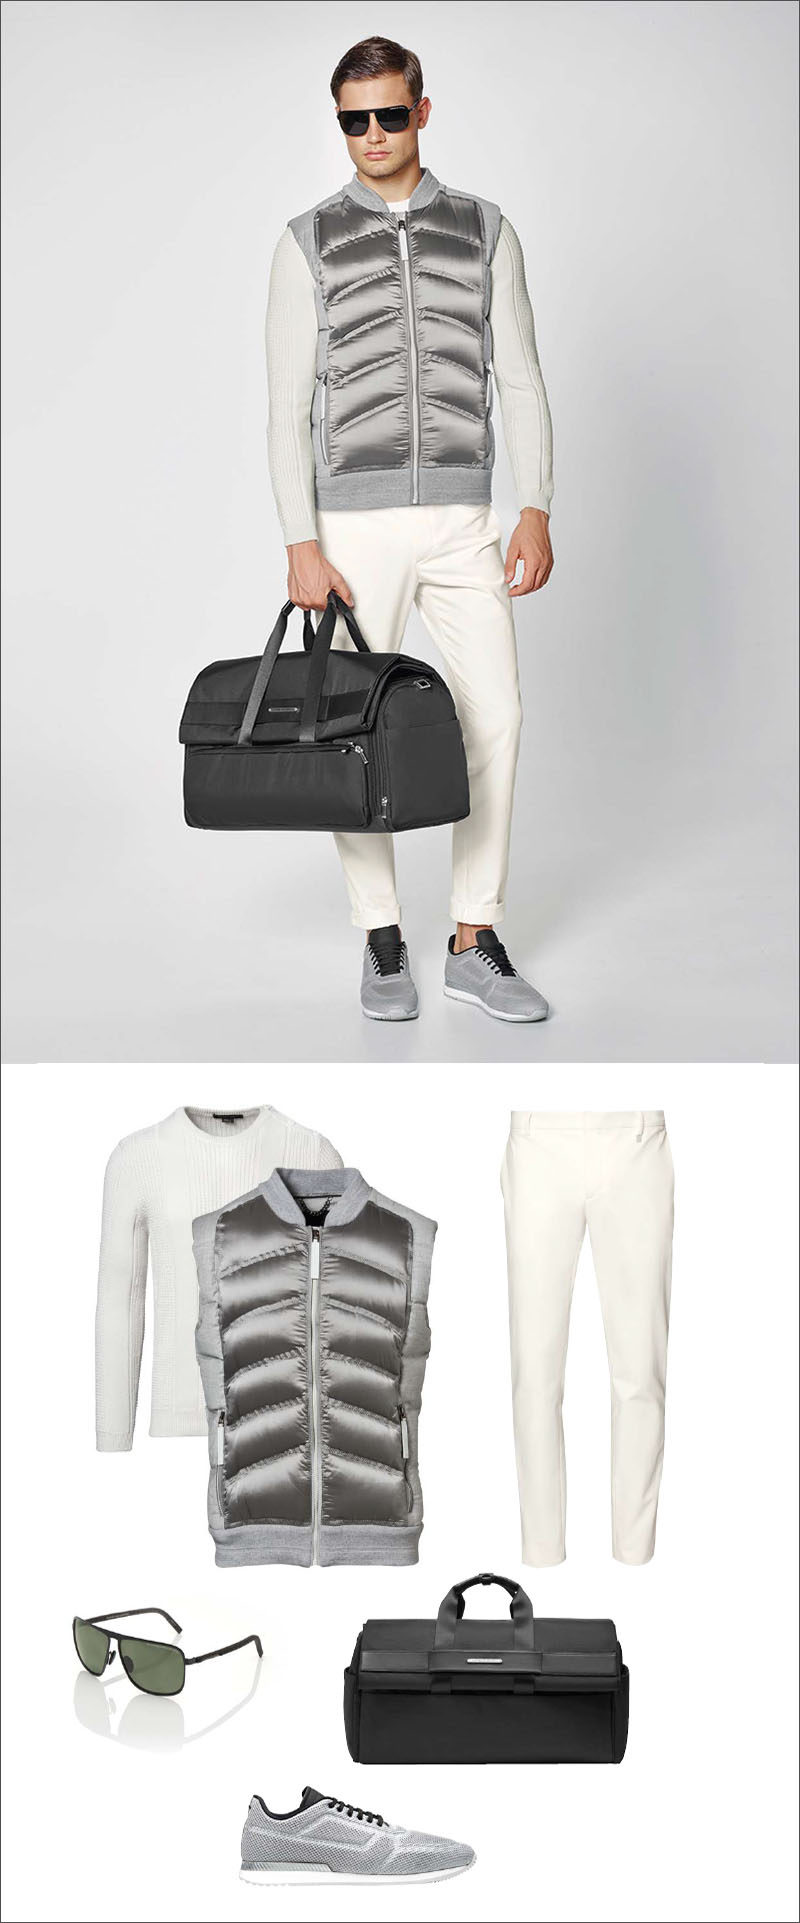 Men's Fashion Ideas - 17 Men's Outfits From Porsche Design's 2017 Spring/Summer Collection | White cotton pants, a white crew neck sweater, and a metallic quilted vest are accessorized with a black weekender bag, dark sunglasses, and light grey mesh sneakers.